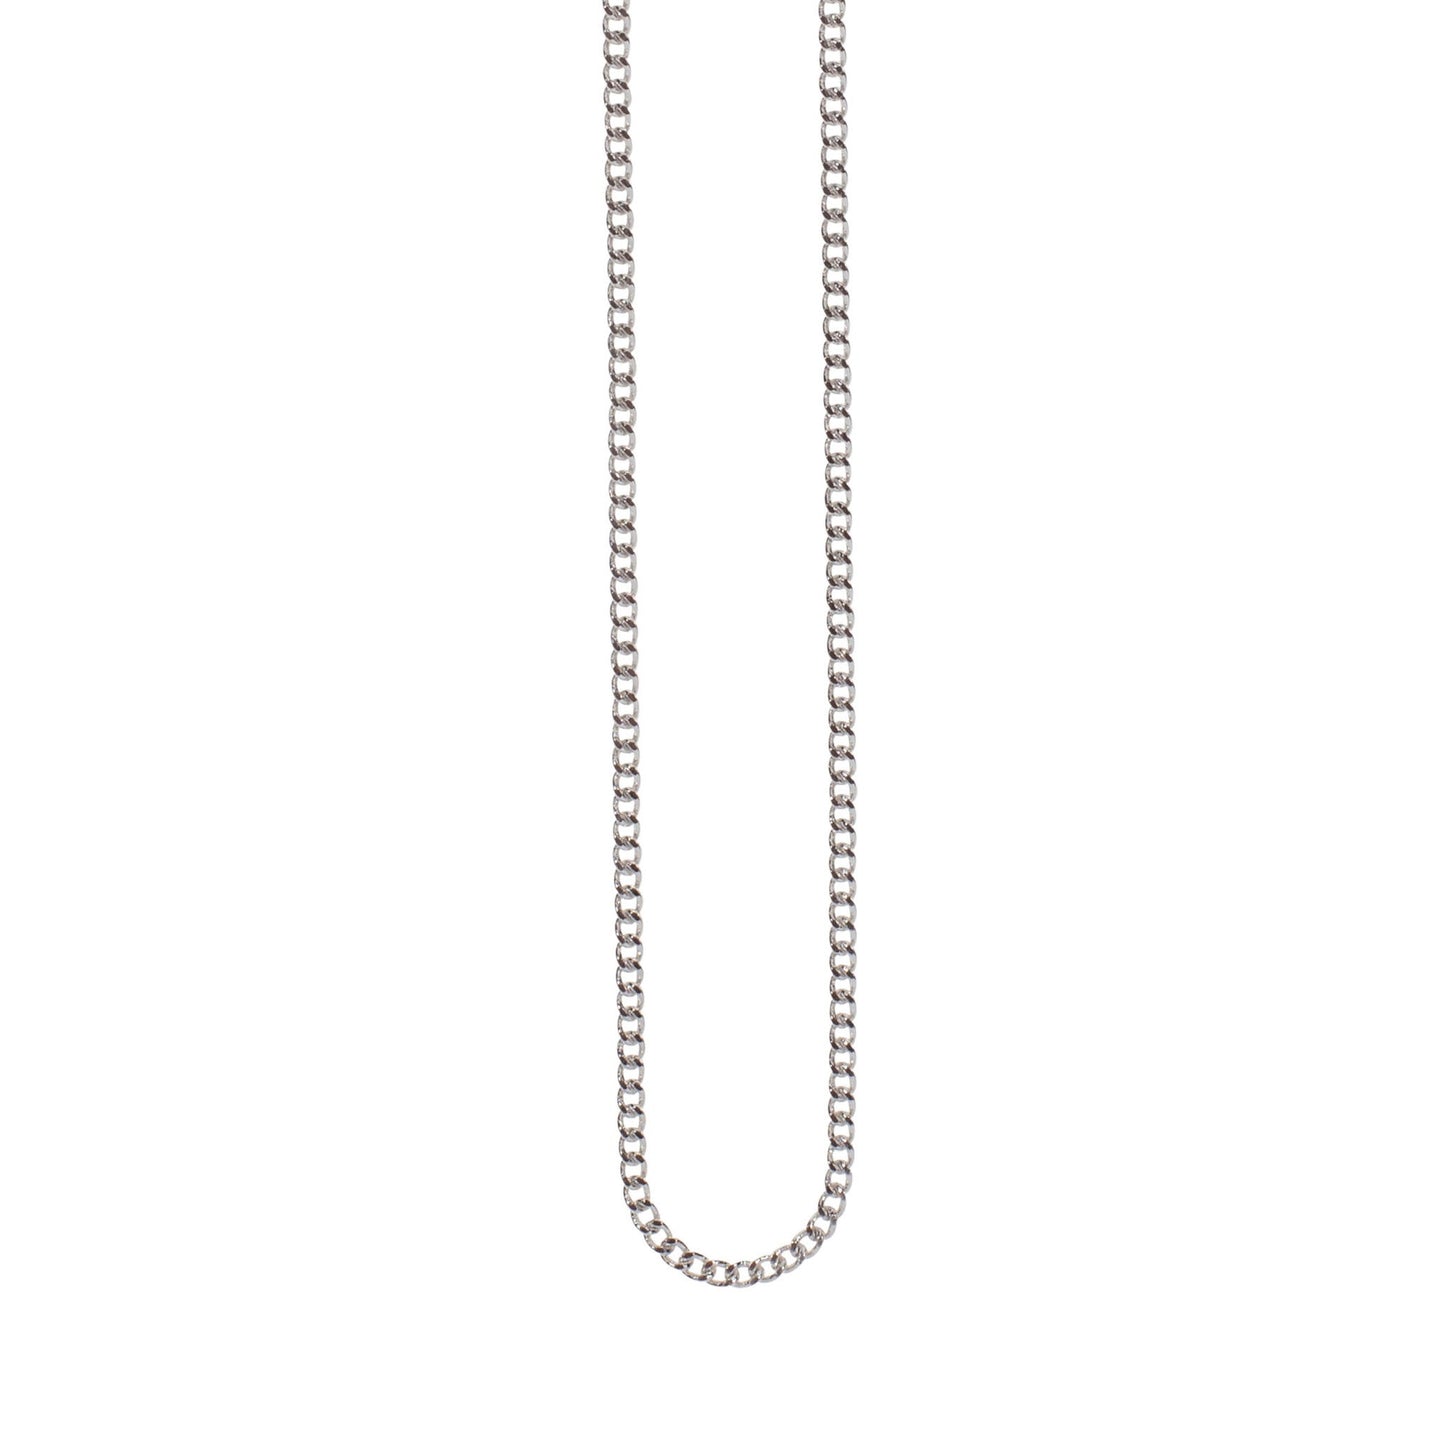 A 18" 1mm flat curb chain displayed on a neutral white background.